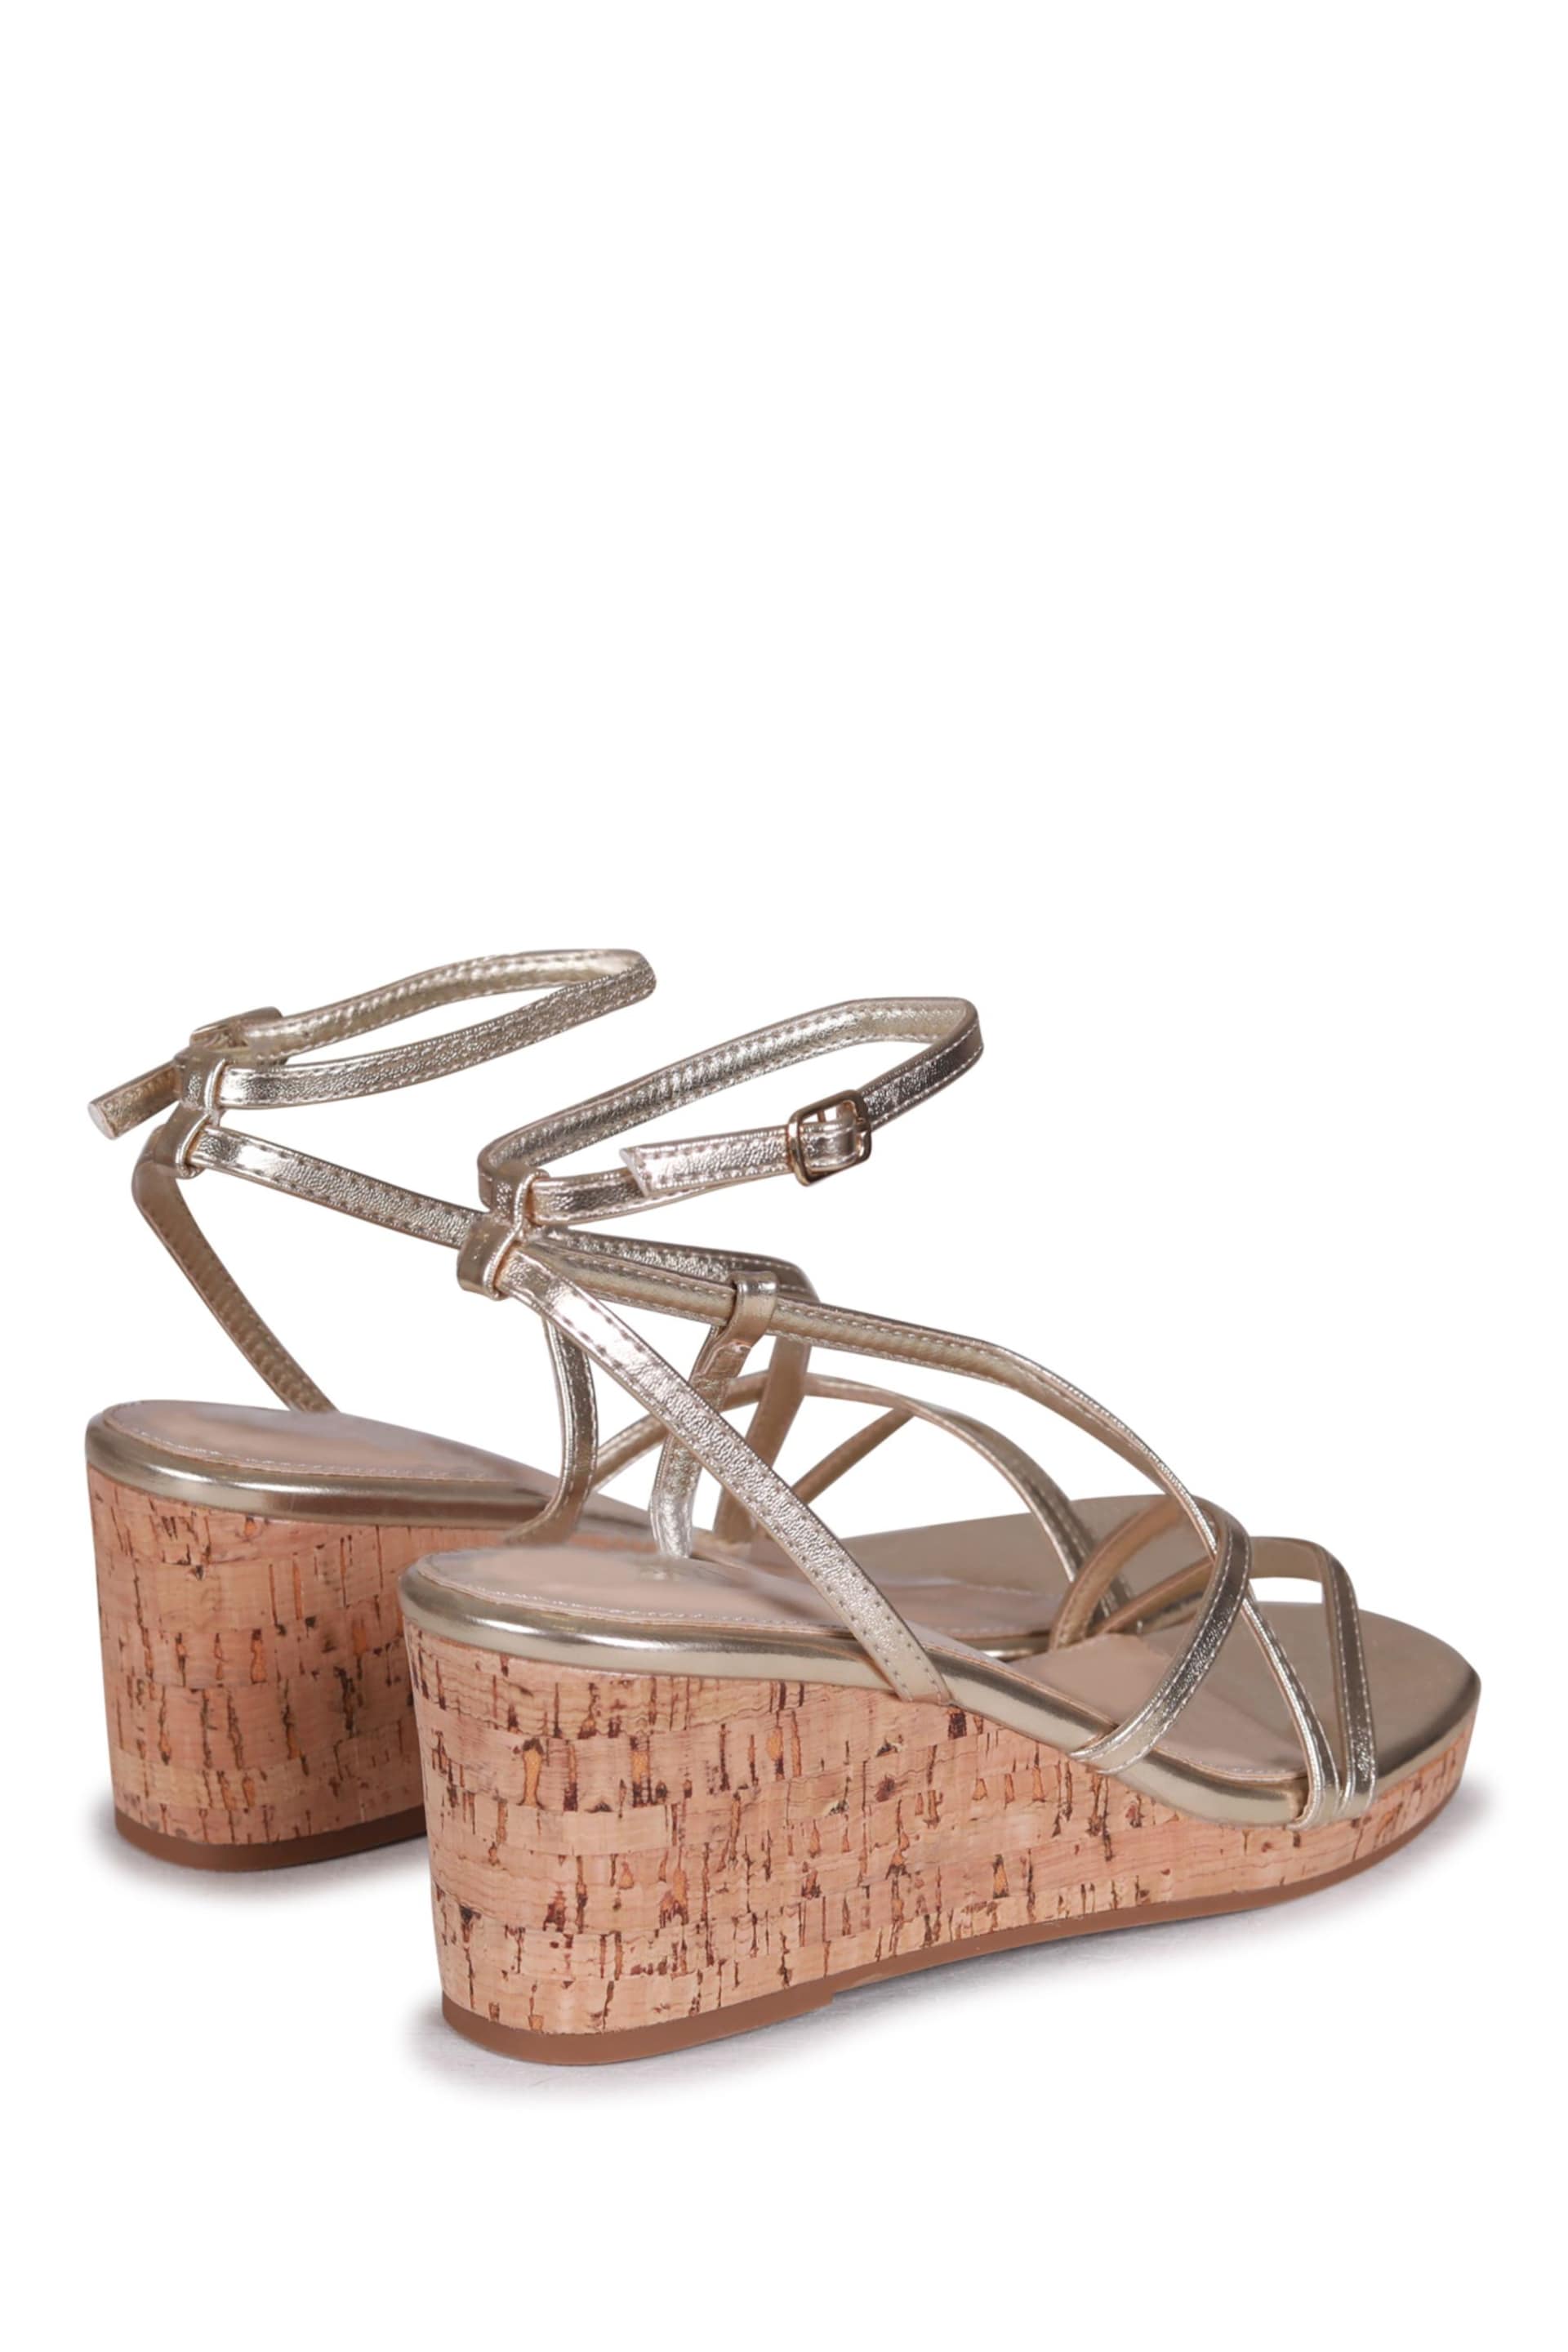 Linzi Gold Aminah Strappy Wedge Sandal With Wrap Around Ankle Strap - Image 4 of 4